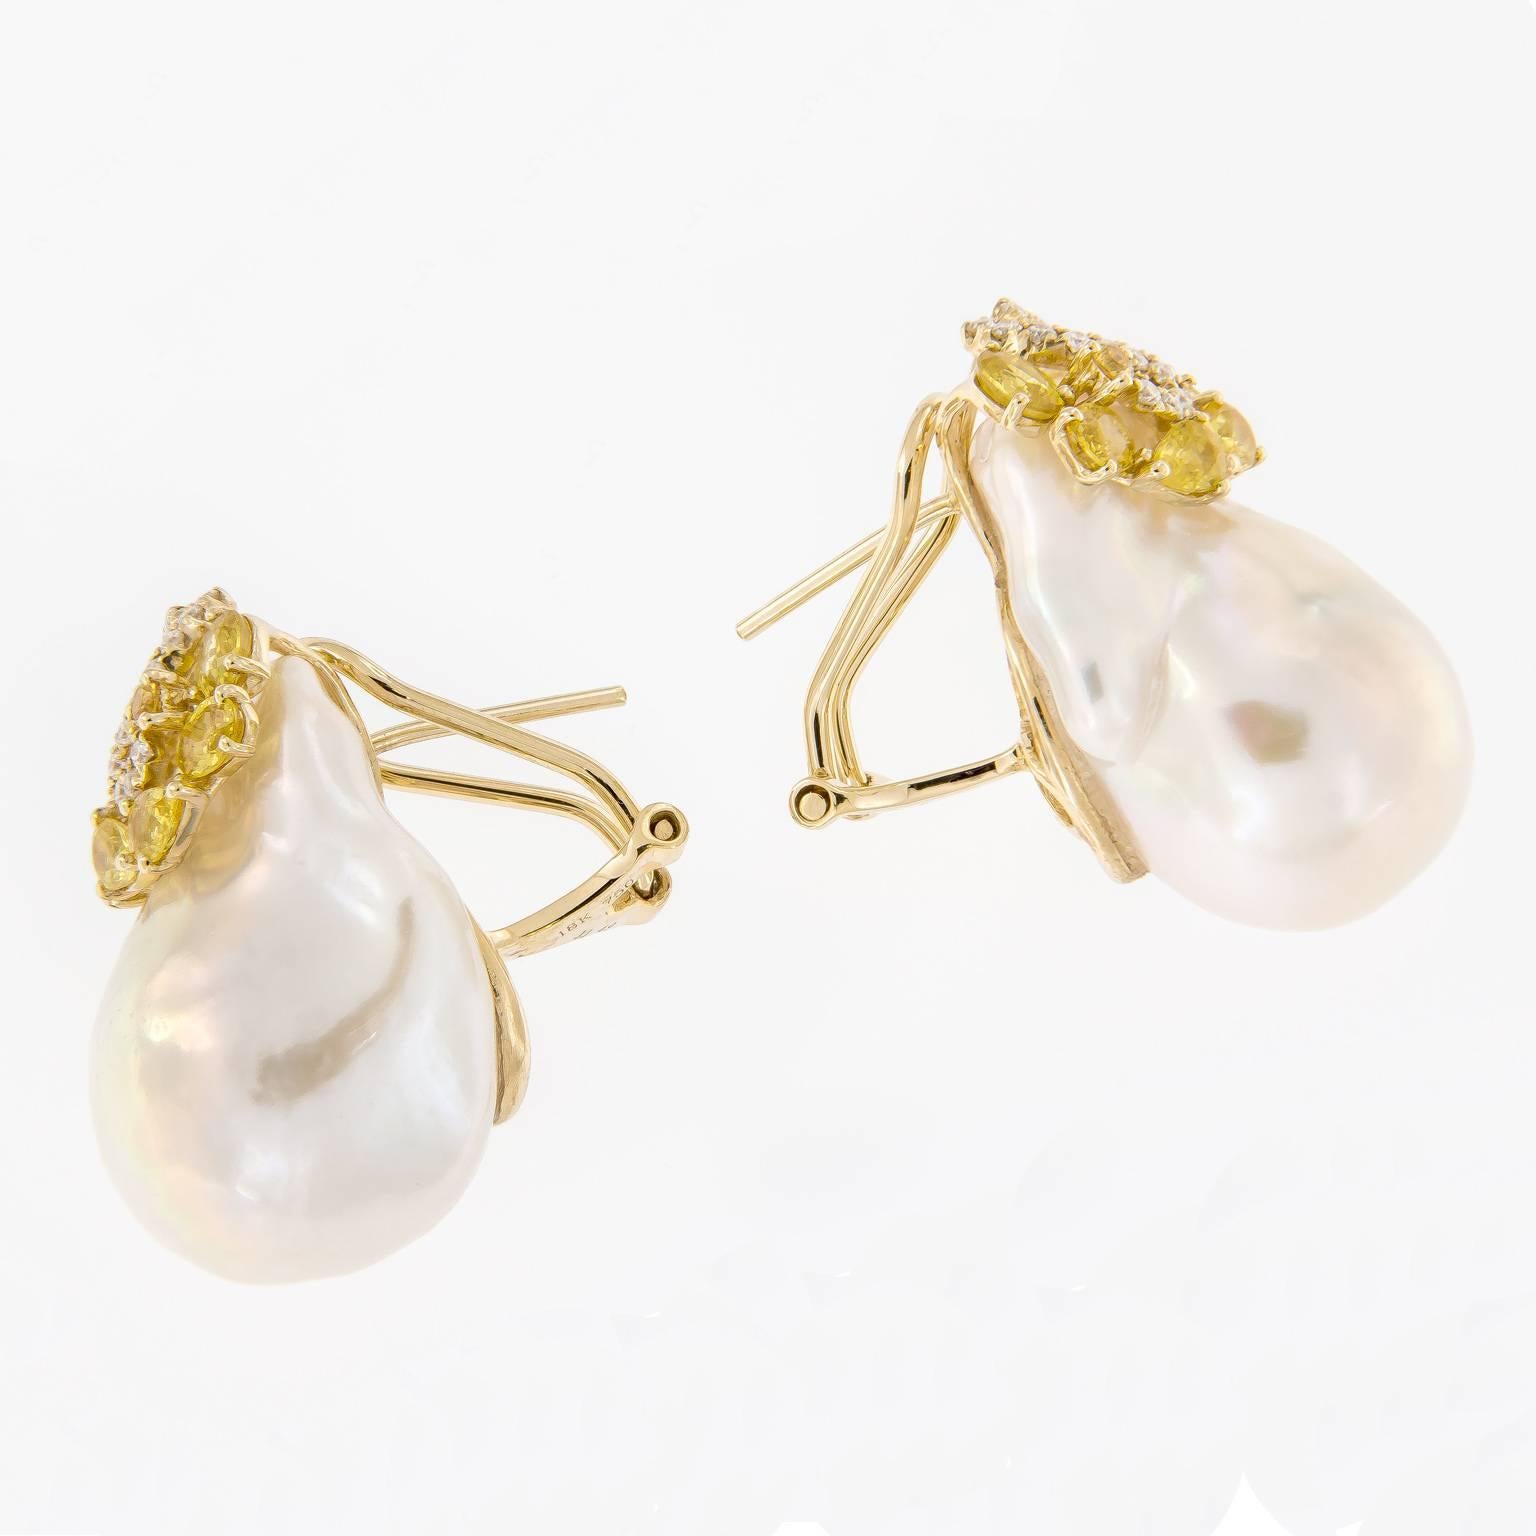 Outstanding large fresh water baroque pearls accented with a cluster of yellow sapphires and a swirl of diamonds. Earrings crafted in 18k yellow gold with omega backs. 1.25 in Long.
 
Yellow Sapphire 2.59 cttw
Diamonds 0.36 cttw